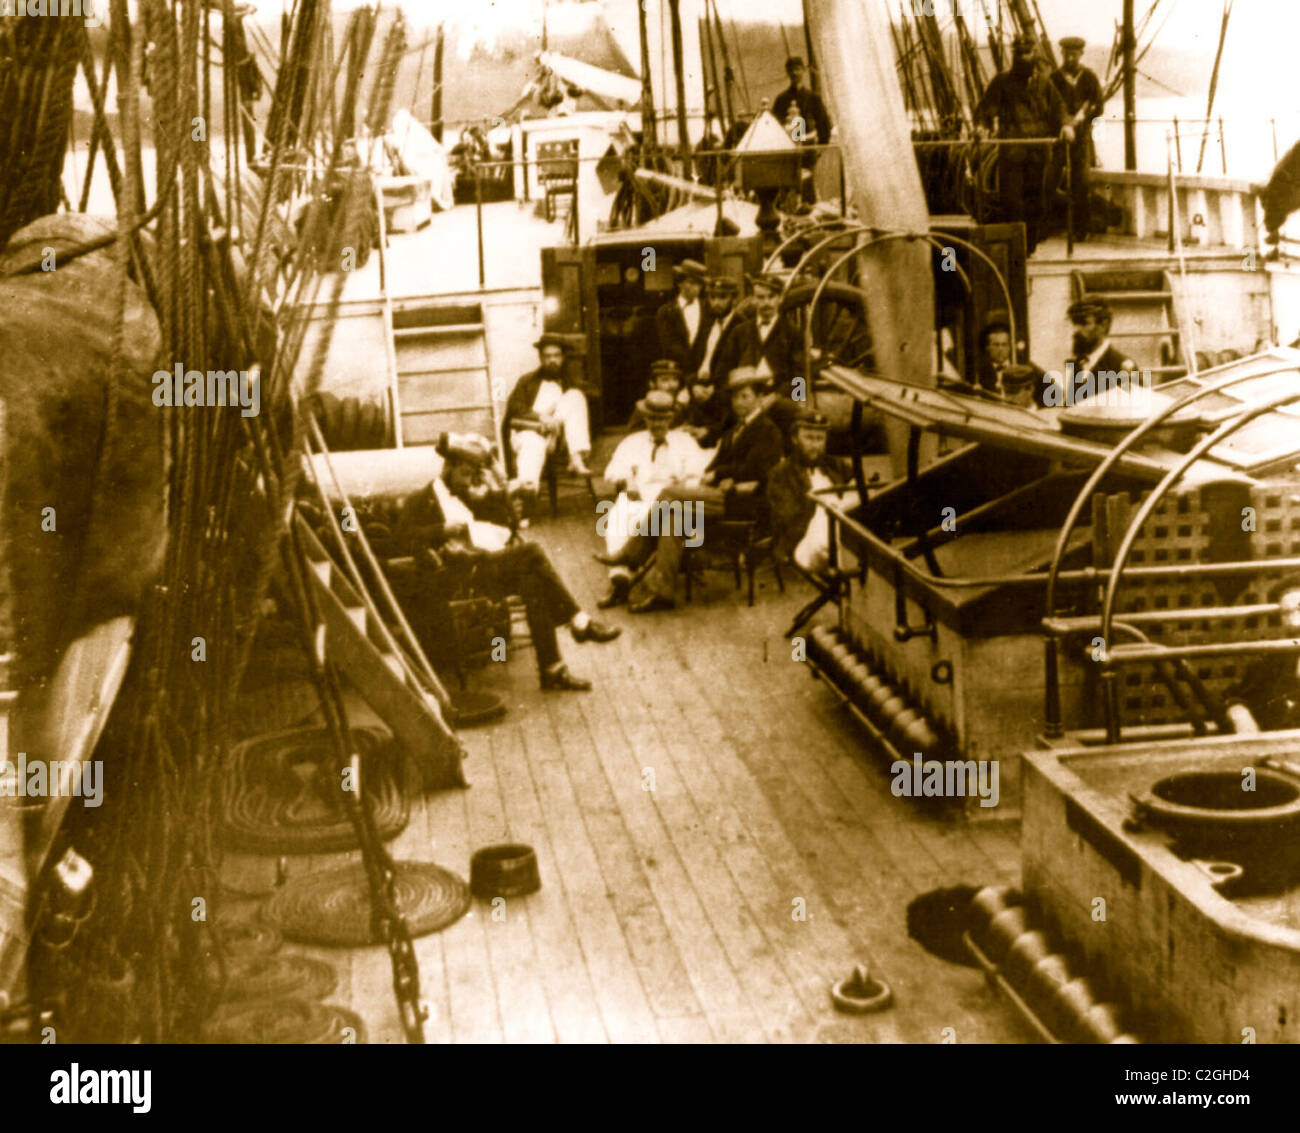 U.S. Naval officers relaxing on deck Stock Photo